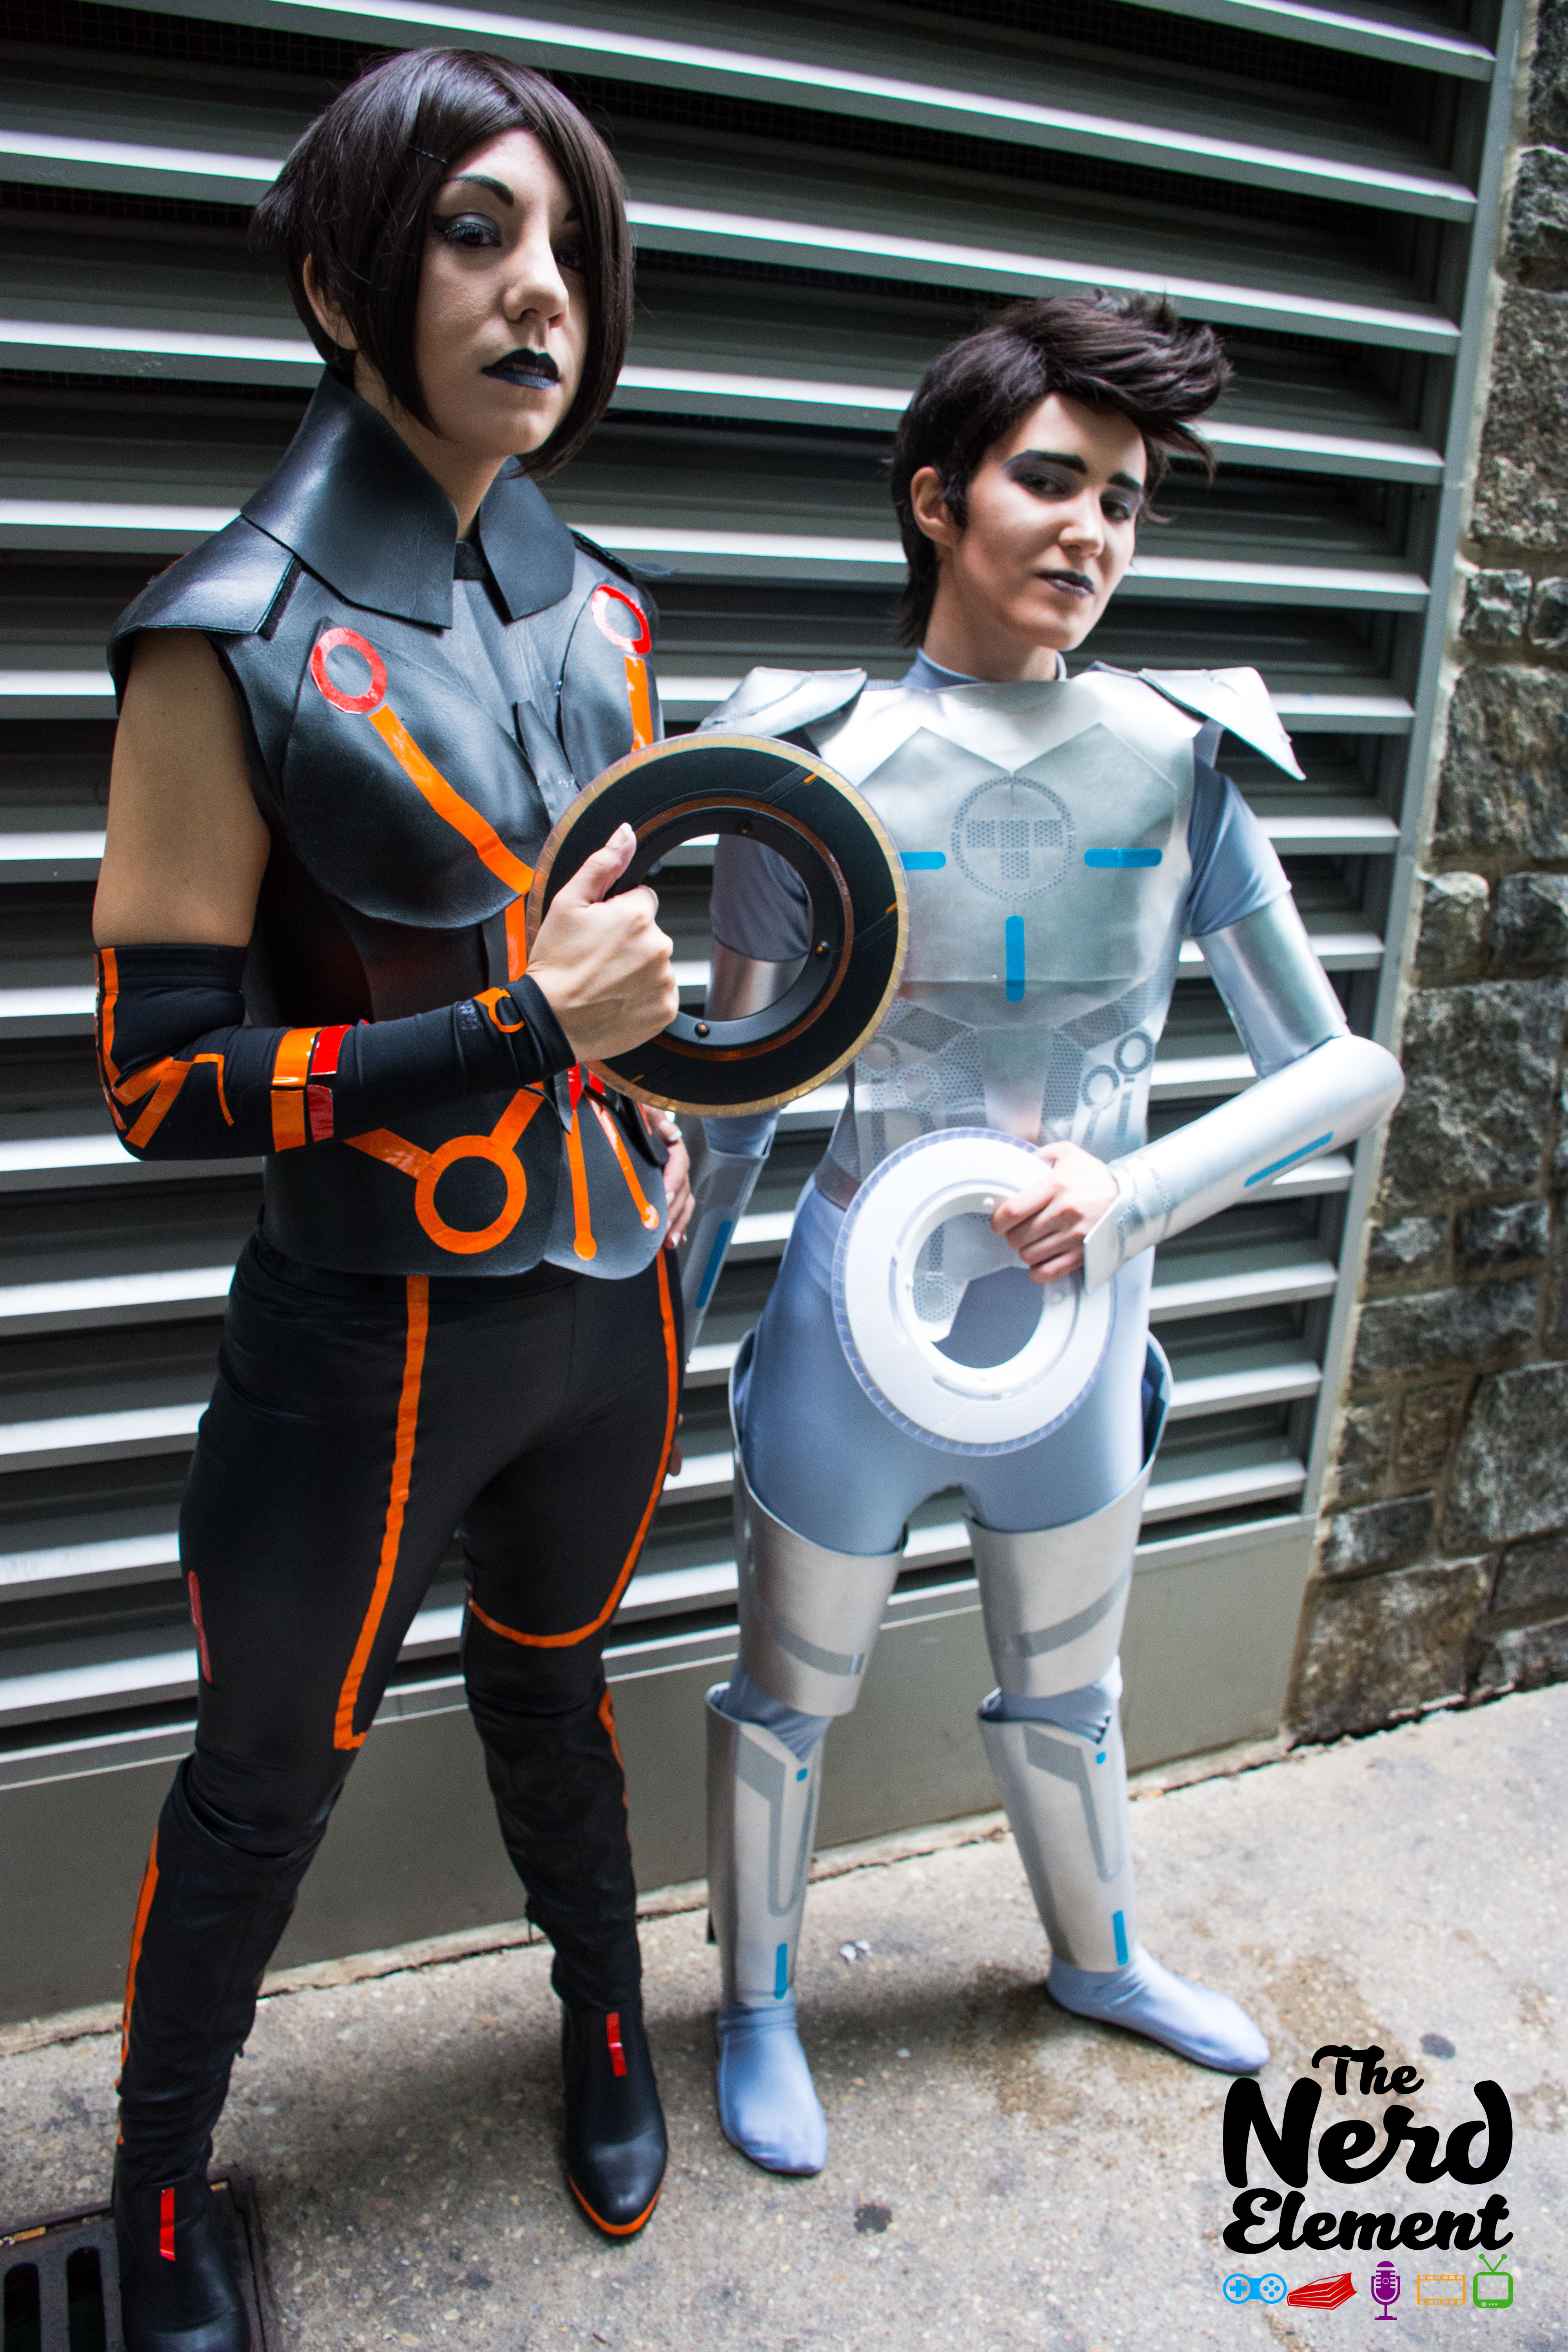 Paige and Beck - Disney's Tron Uprising
Cosplayers: shotabootyshorts (ig) and shesaniso (ig)